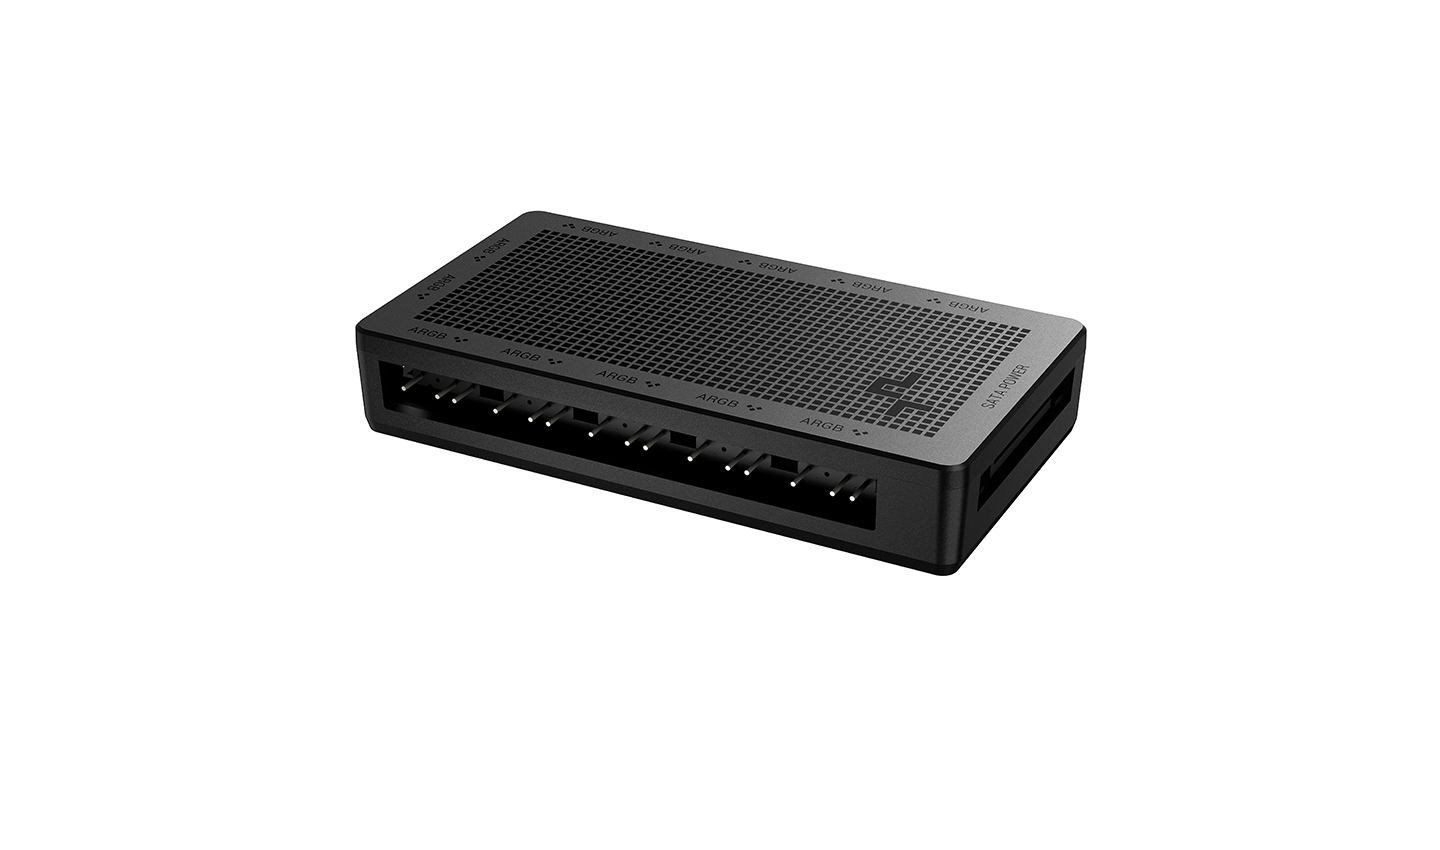 DeepCool SC700 Black (DeepCool SC700 Addressable RGB Hub 12-Port Connect Up To 12 5V Argb 3-Pin Components Simultaneously While Only Occupying One 3-Pin Motherboard Header Magnetic For Easy Install